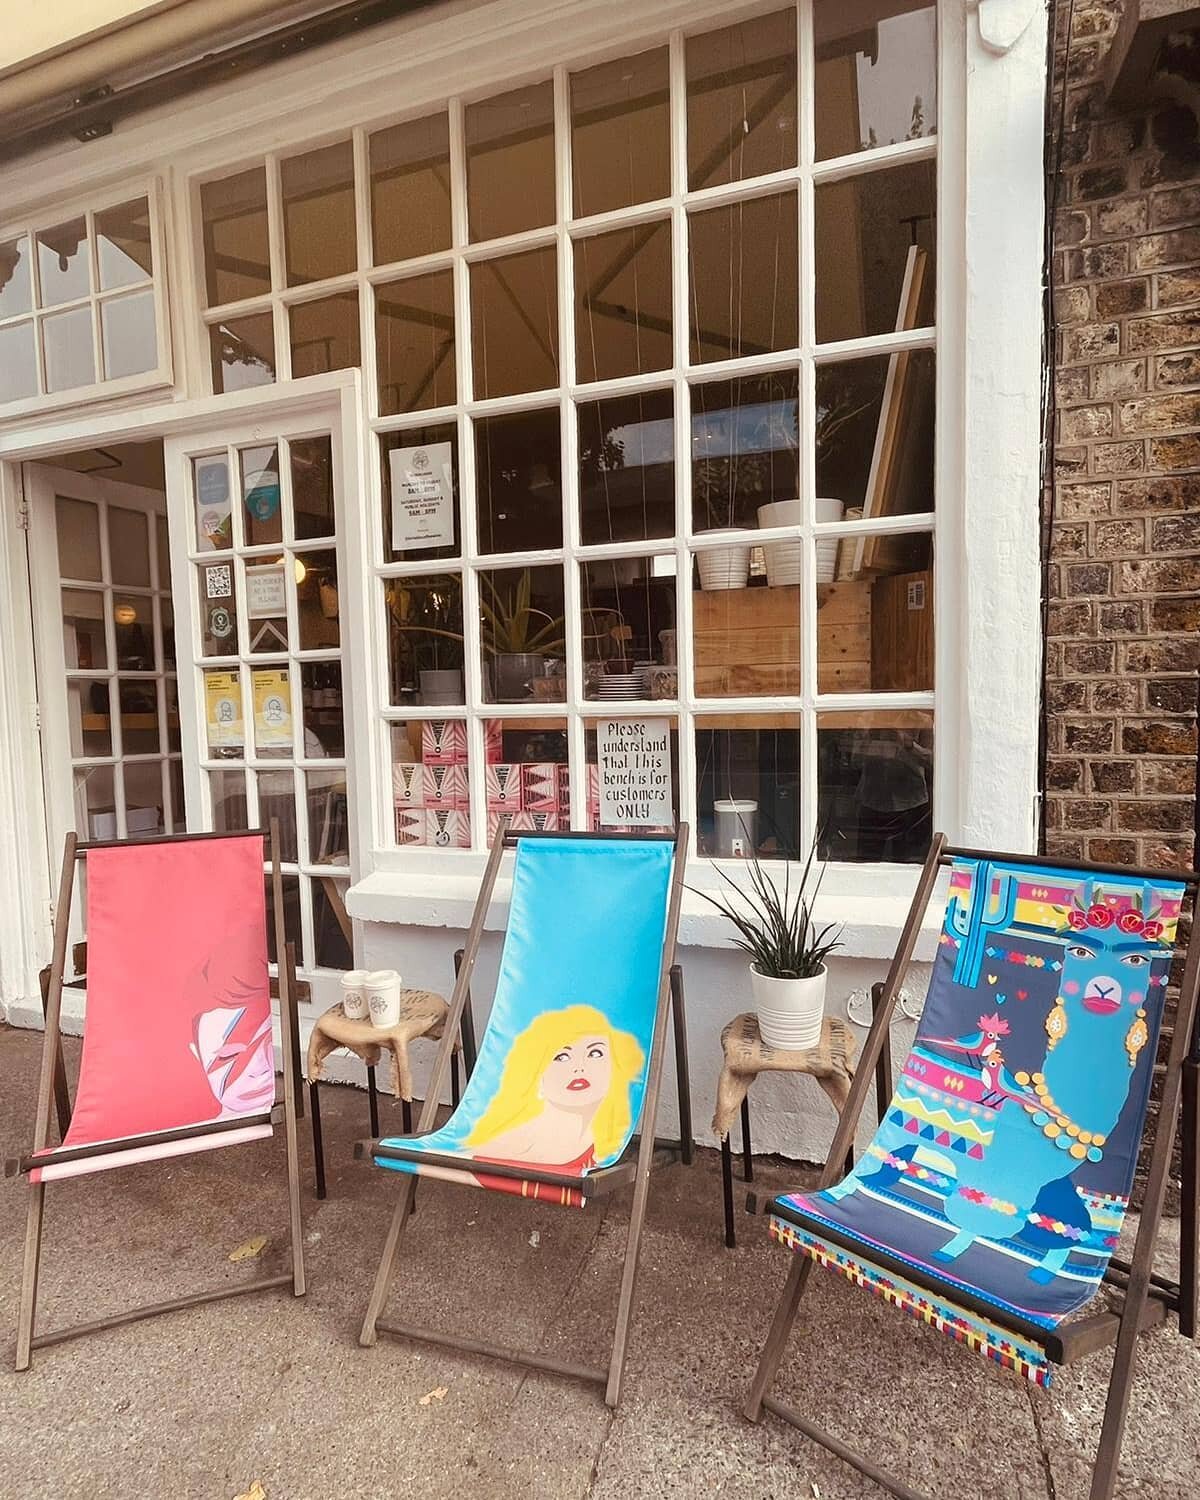 Good morning! Hoping for another terrific tuesday! Pop in and say hi, open 8-8

#coffee #coffeeandconversation #specialitycoffee #specialitywines #specialitydrinks #cbdrinks #sunny #tuesdayvibes #suntrap